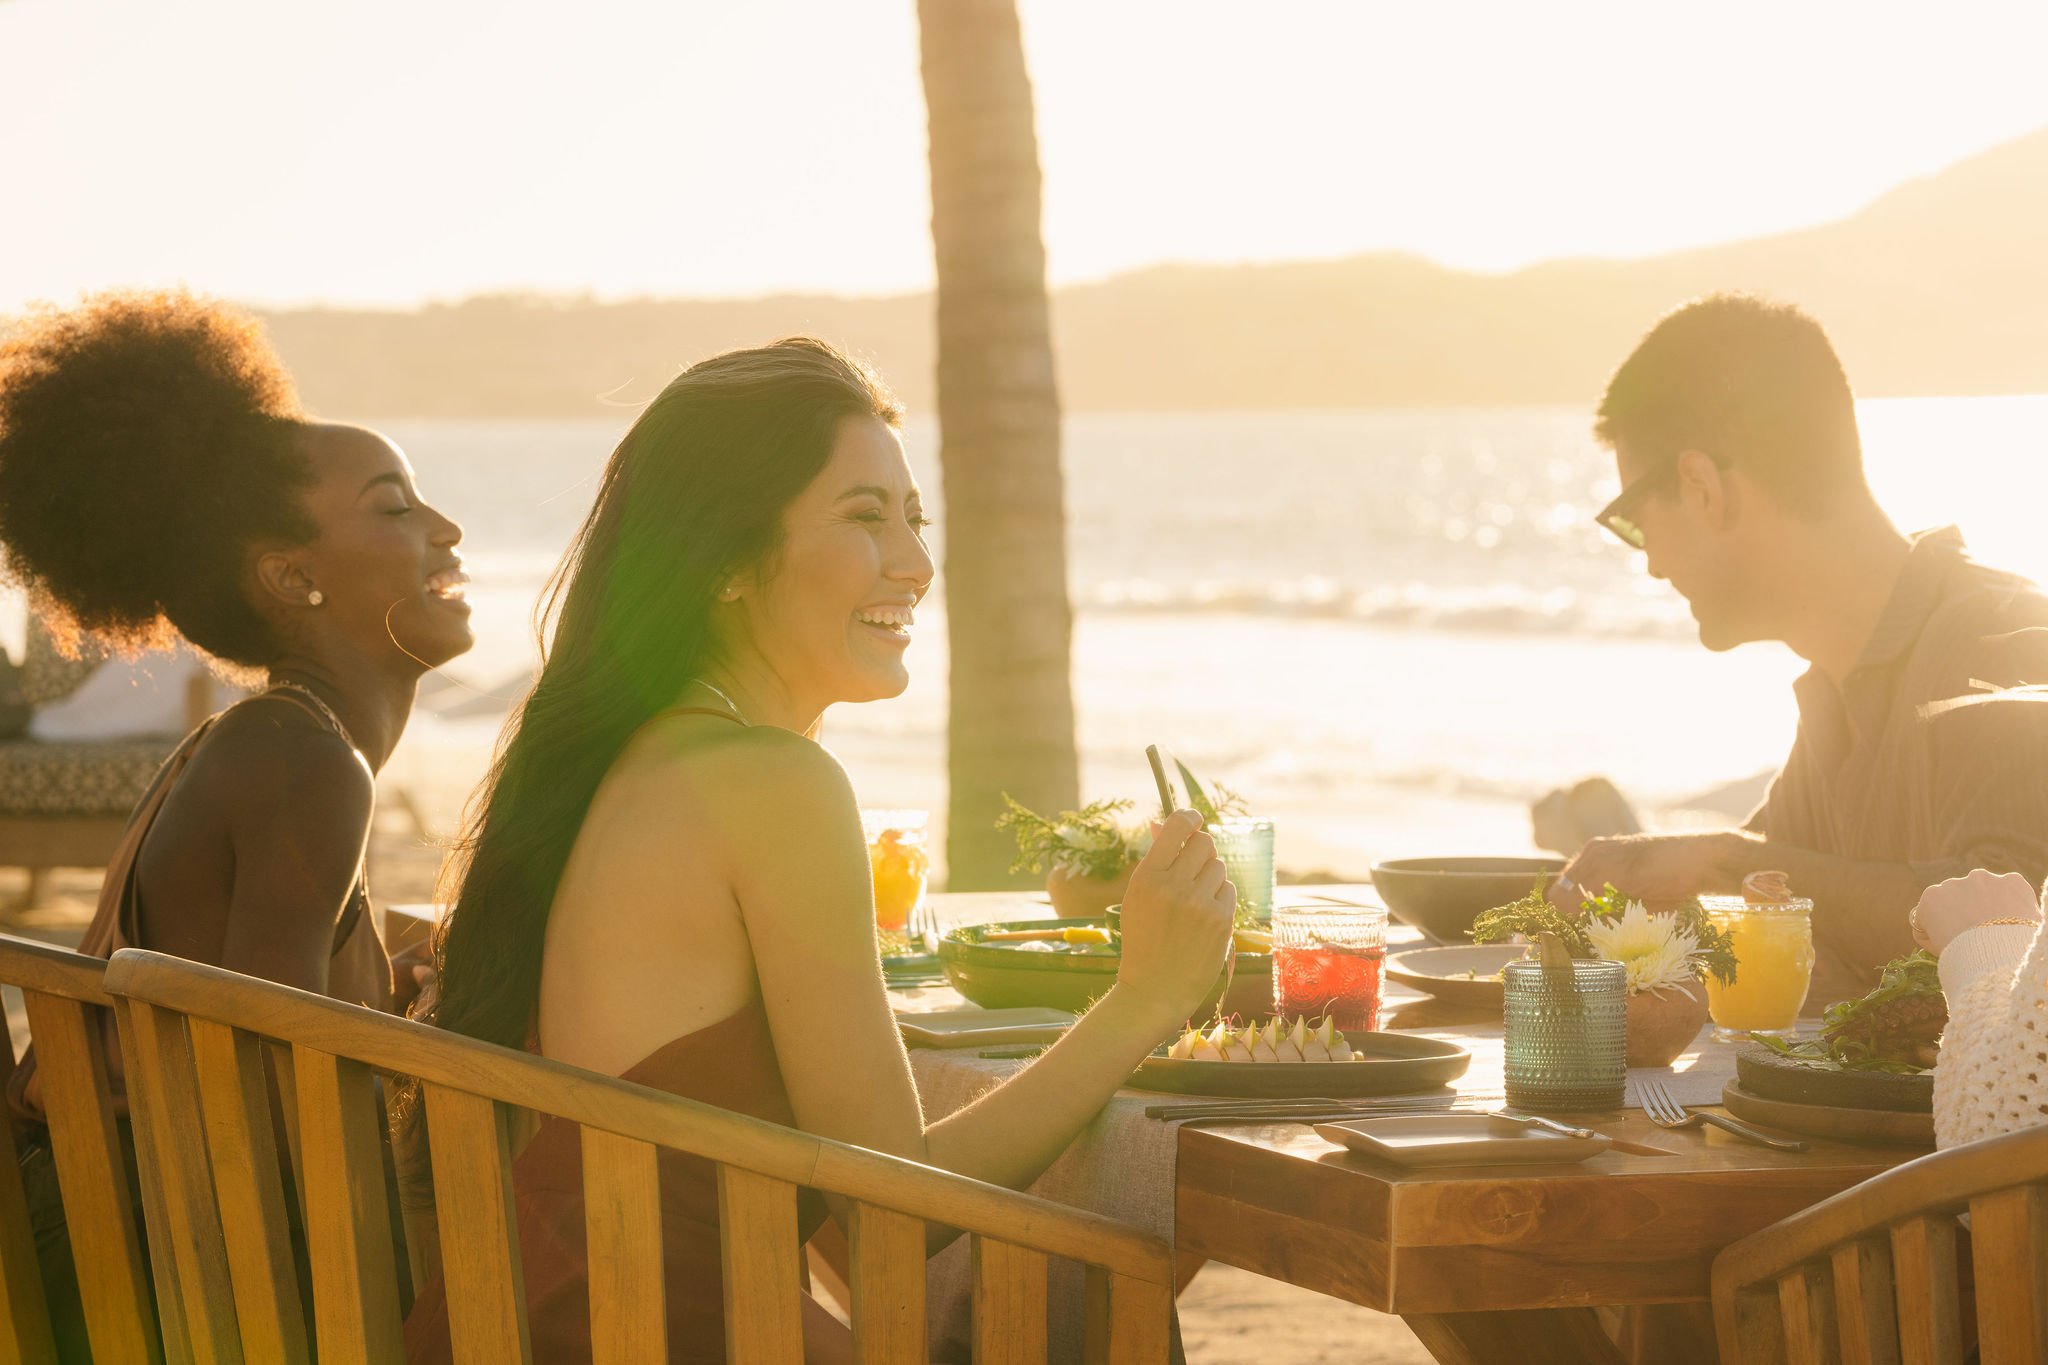 Two women and a man savor breakfast by the seaside in the morning sun.